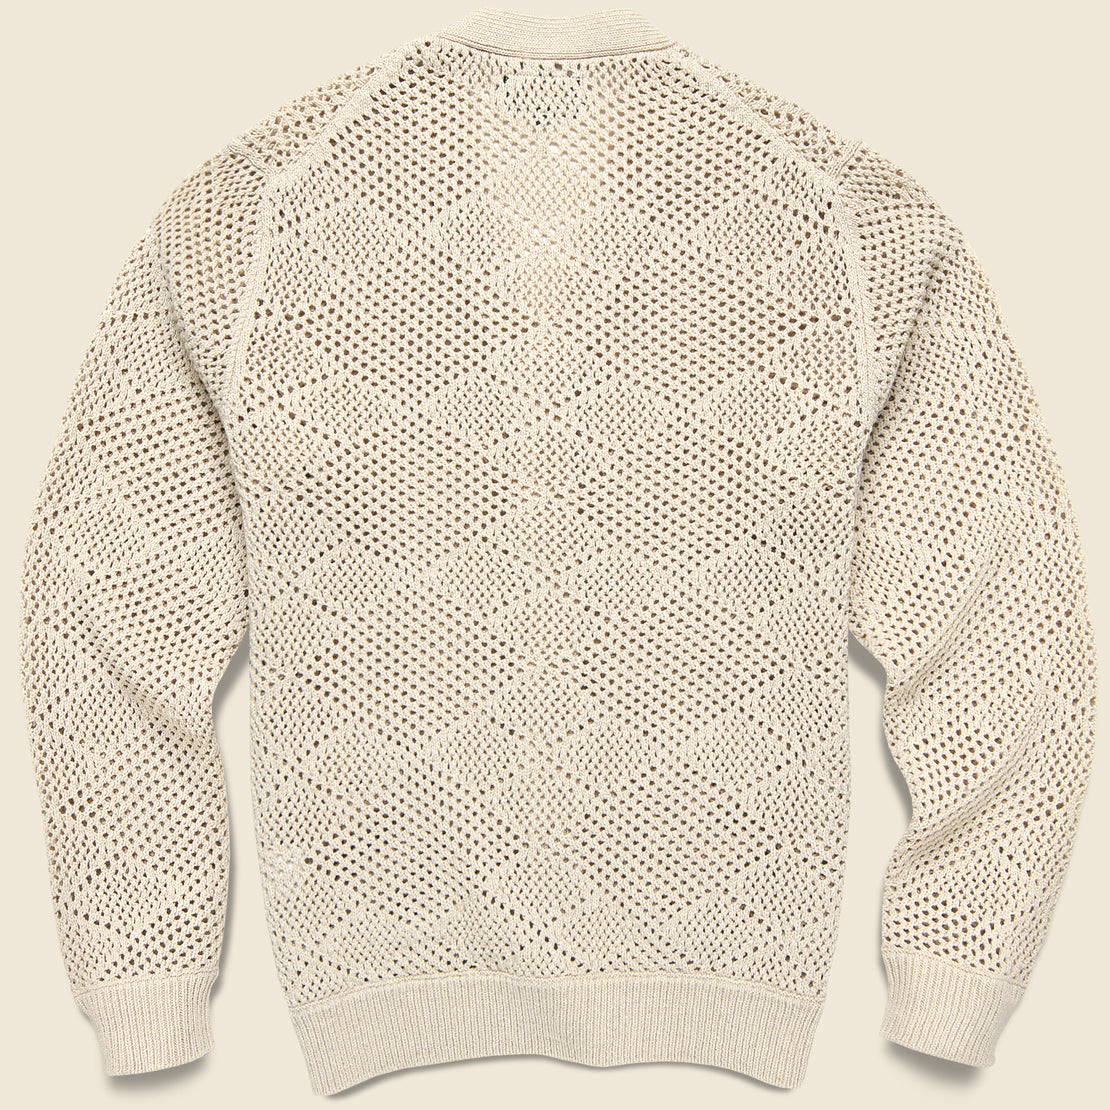 Argyle Mesh Cardigan - Beige - BEAMS+ - STAG Provisions - Tops - Sweater